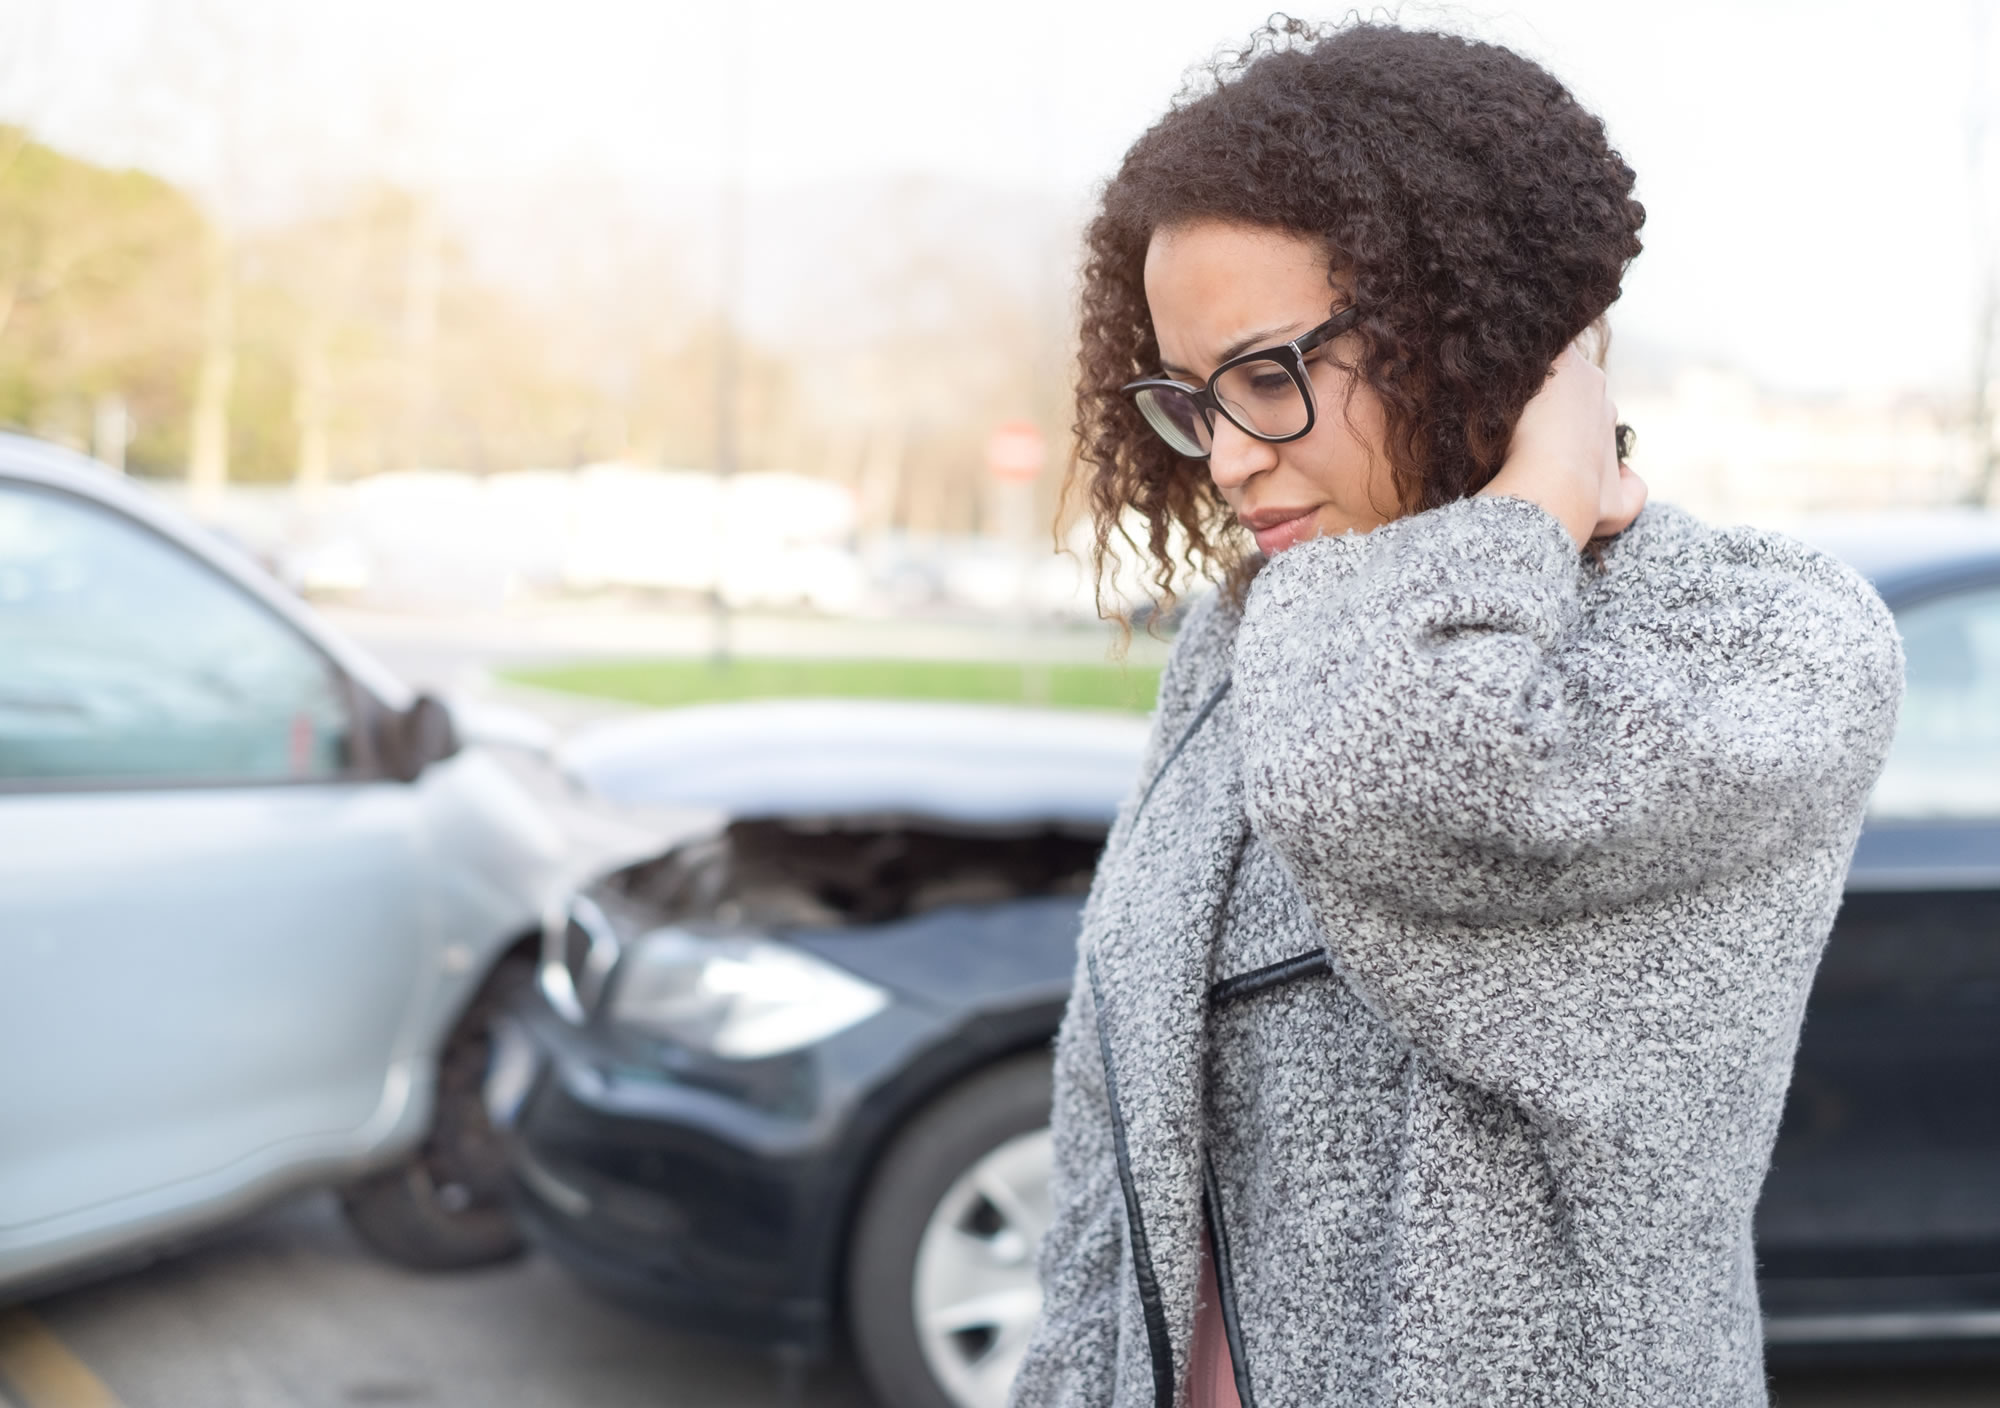 Whiplash Injury Compensation, Personal Injury Claim. Road Traffic Accident solicitors Aberdeen